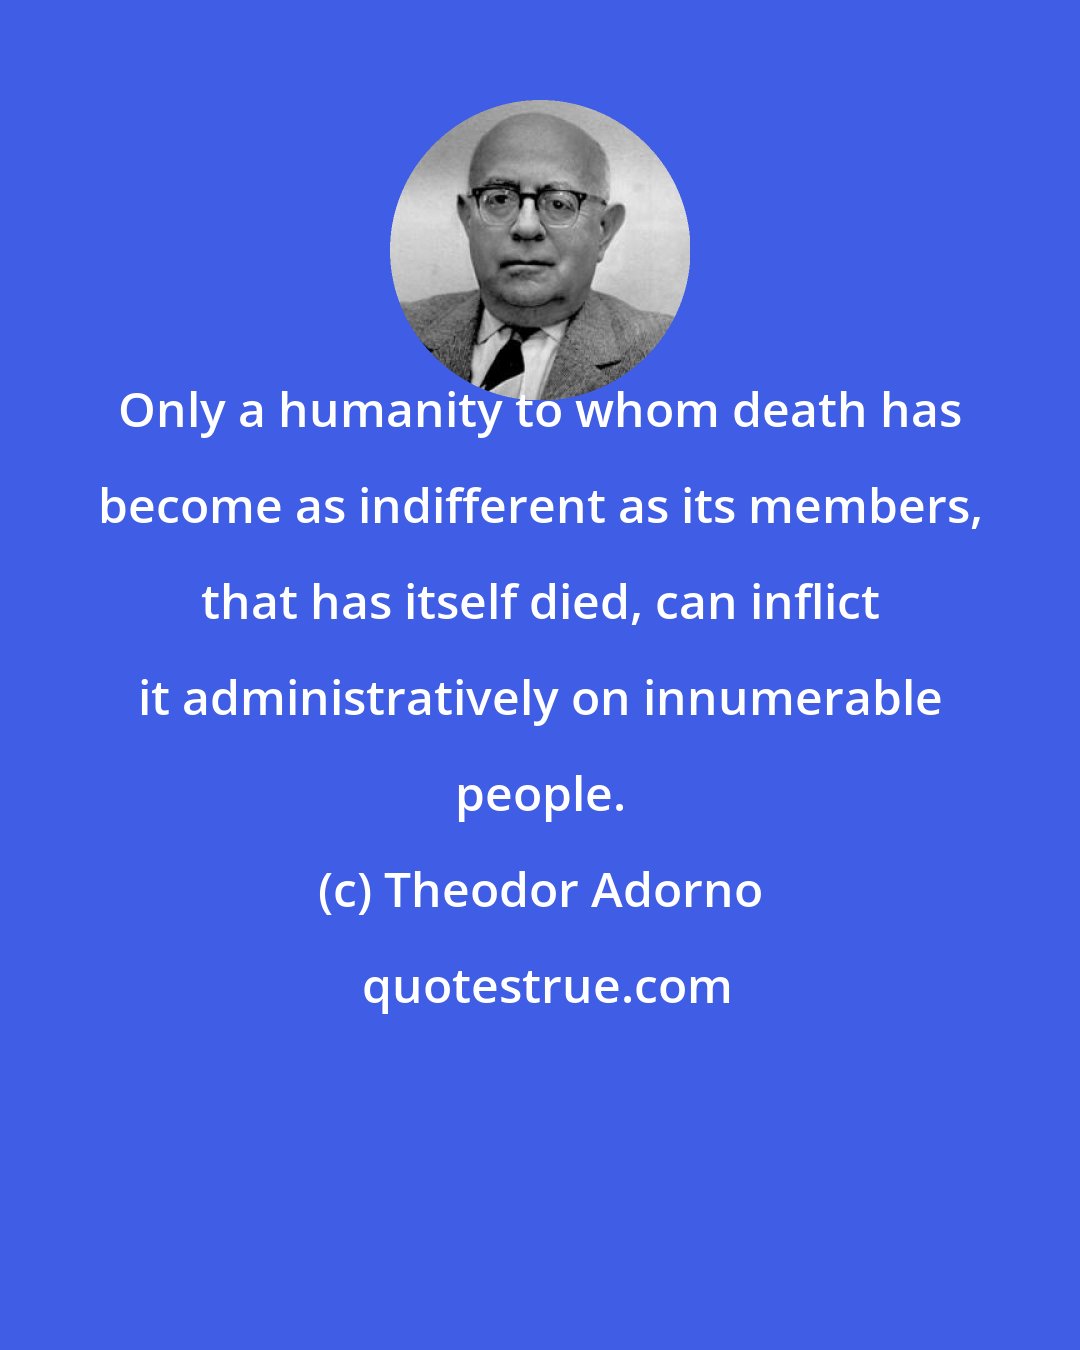 Theodor Adorno: Only a humanity to whom death has become as indifferent as its members, that has itself died, can inflict it administratively on innumerable people.